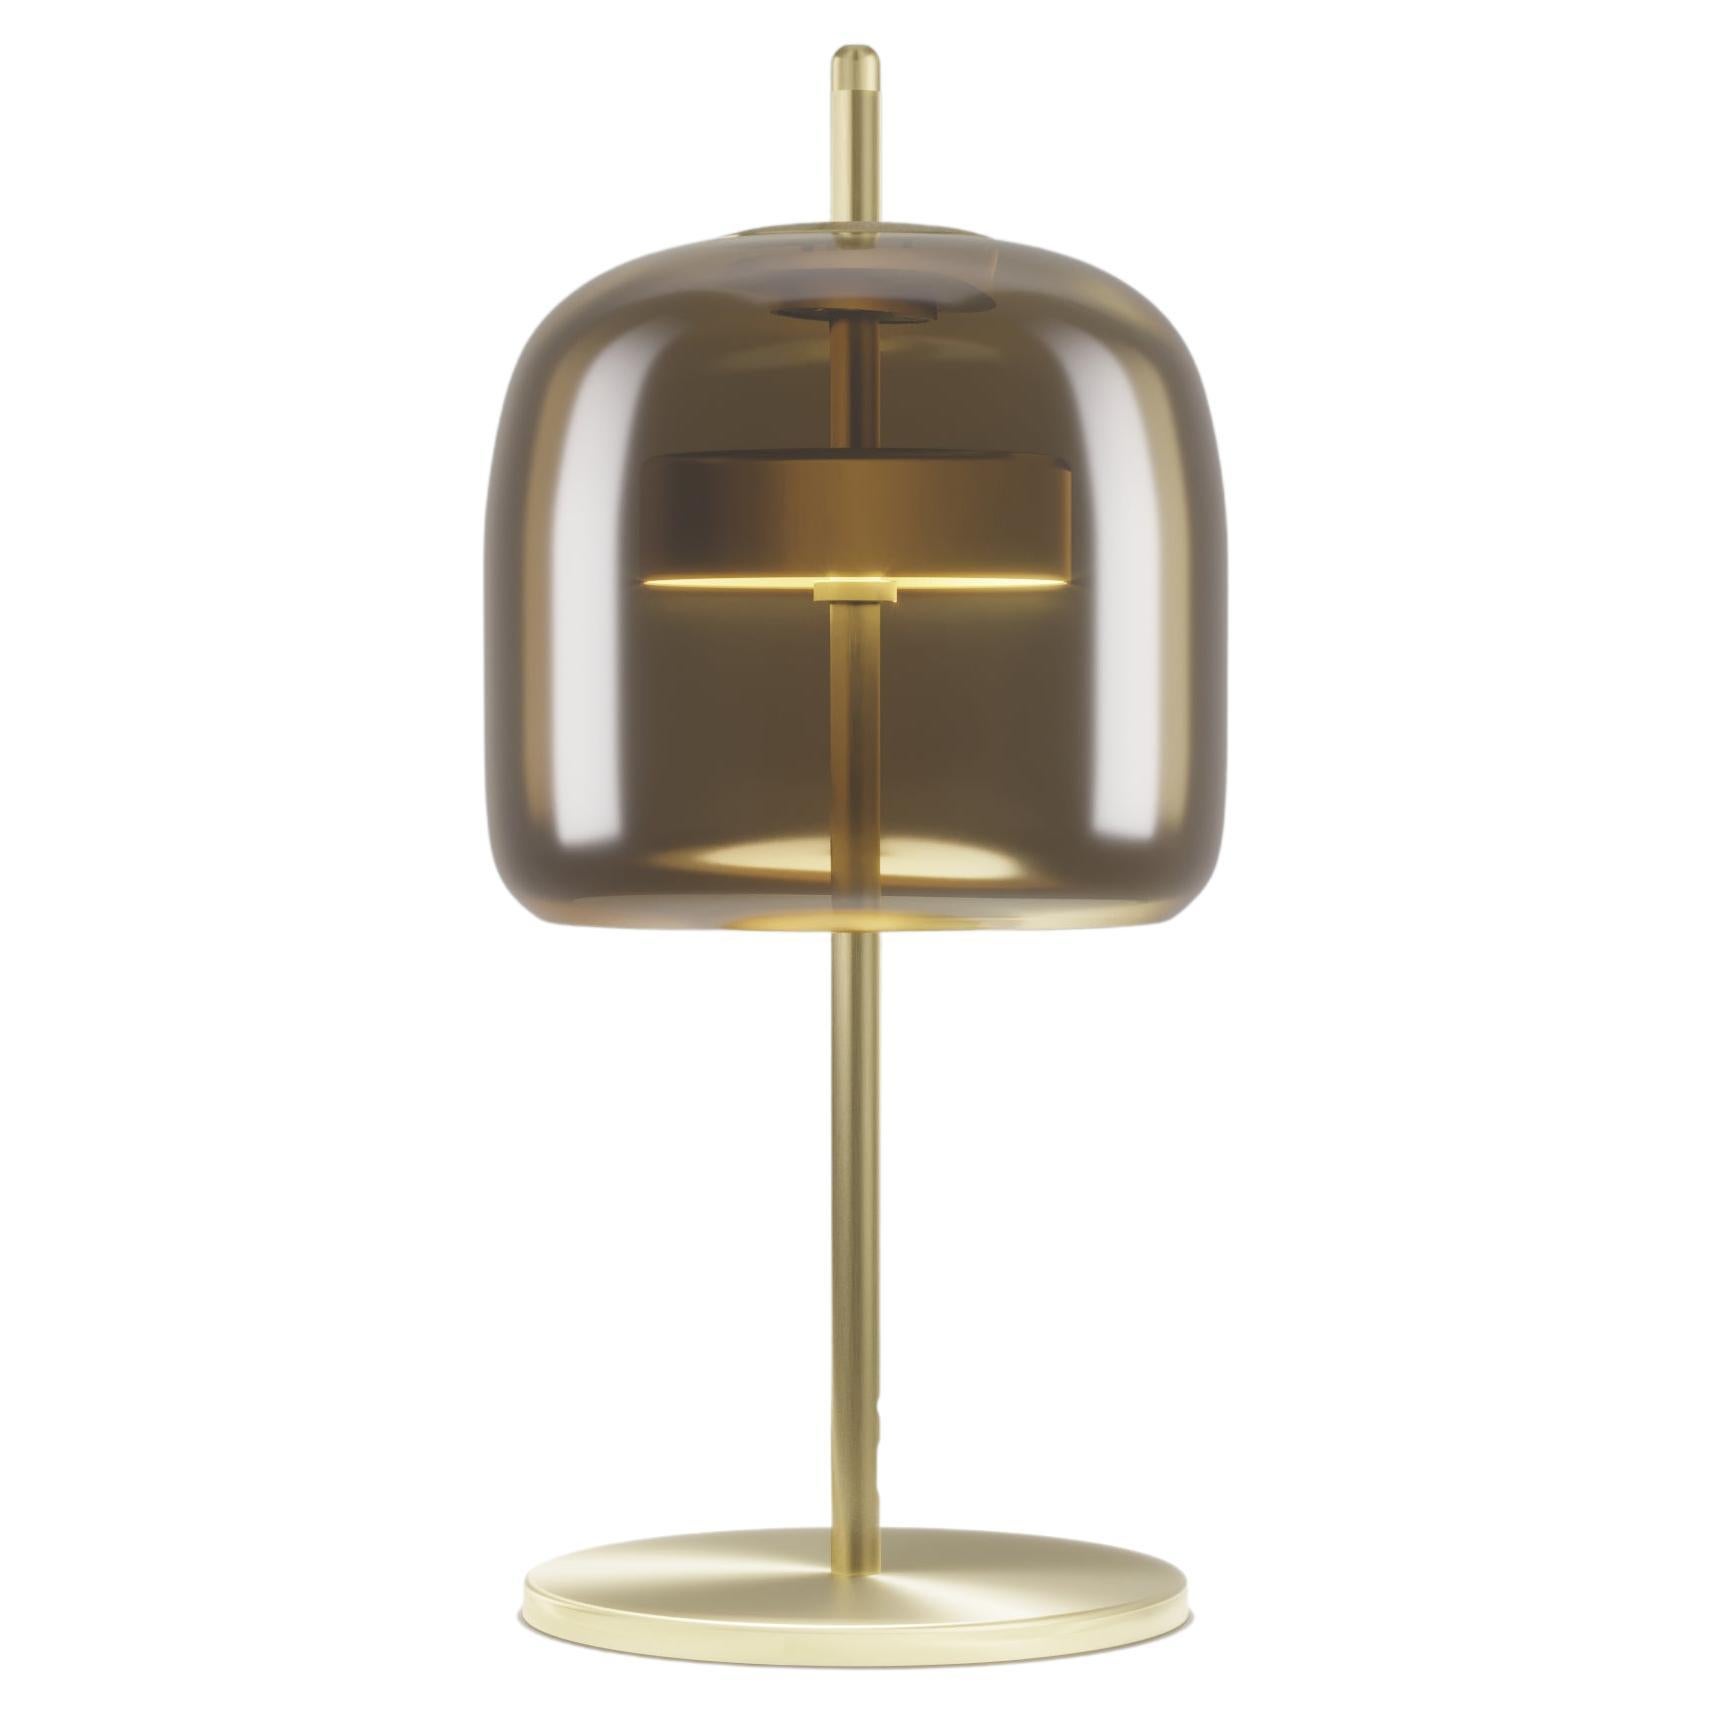 Vistosi Jube Table Lamp in Burned Earth Transparent Glass And Matt Gold Finish For Sale